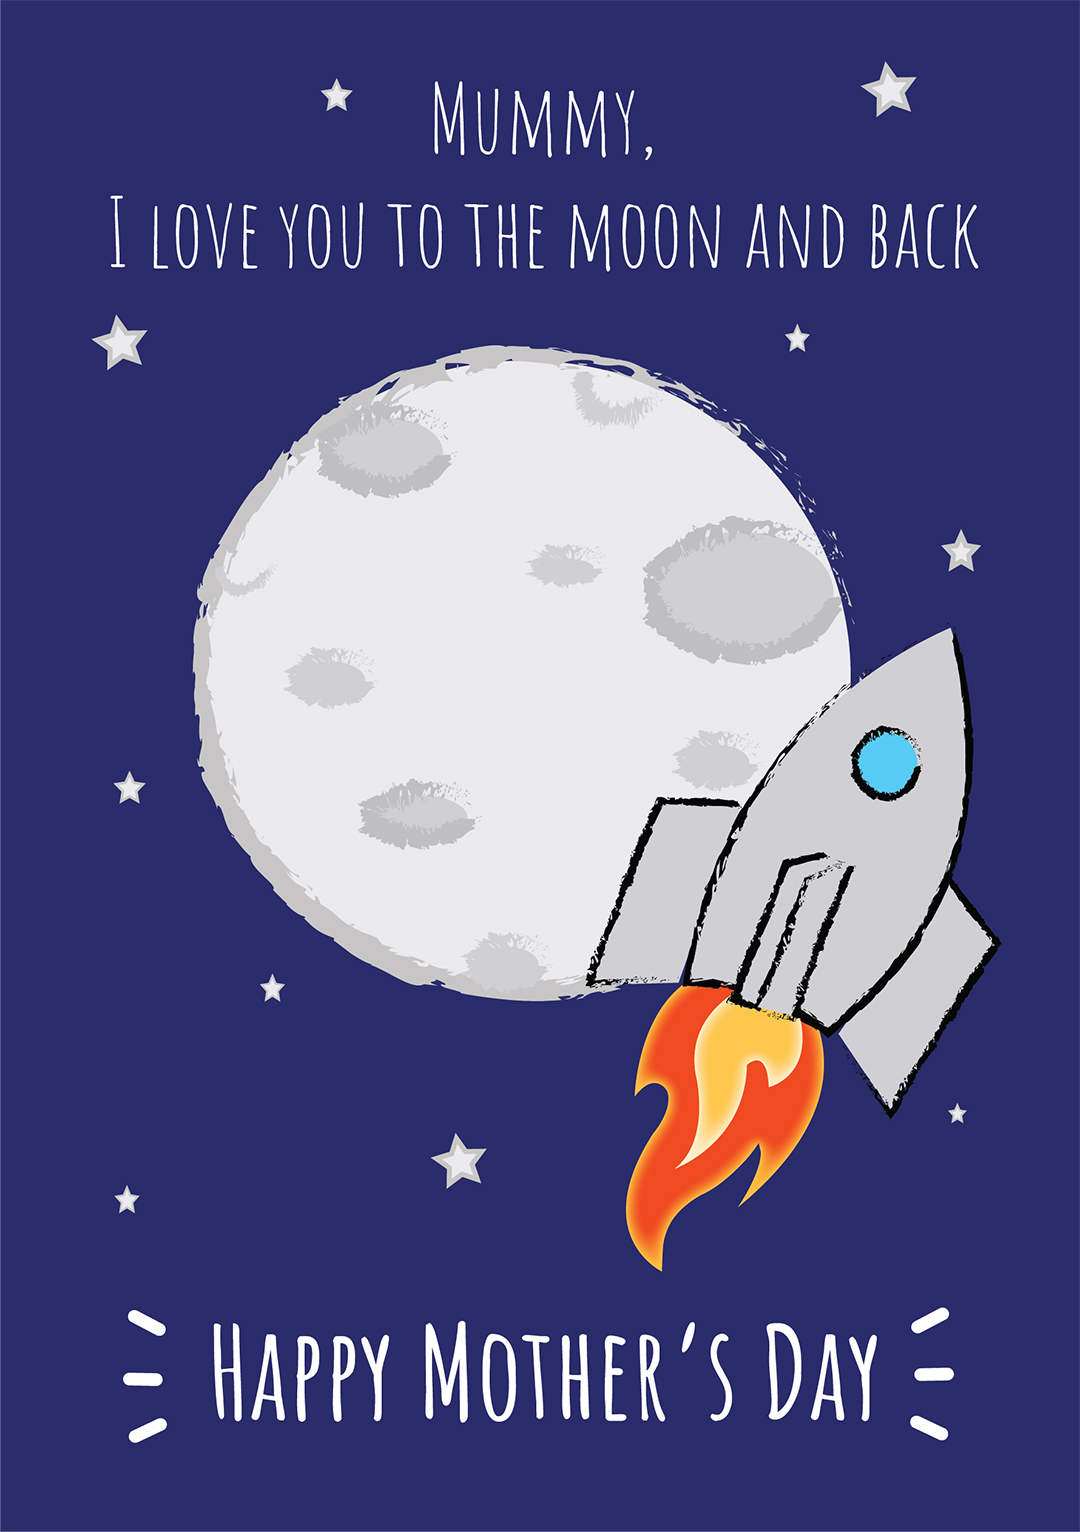 To The Moon And Back - Mother's Day Card